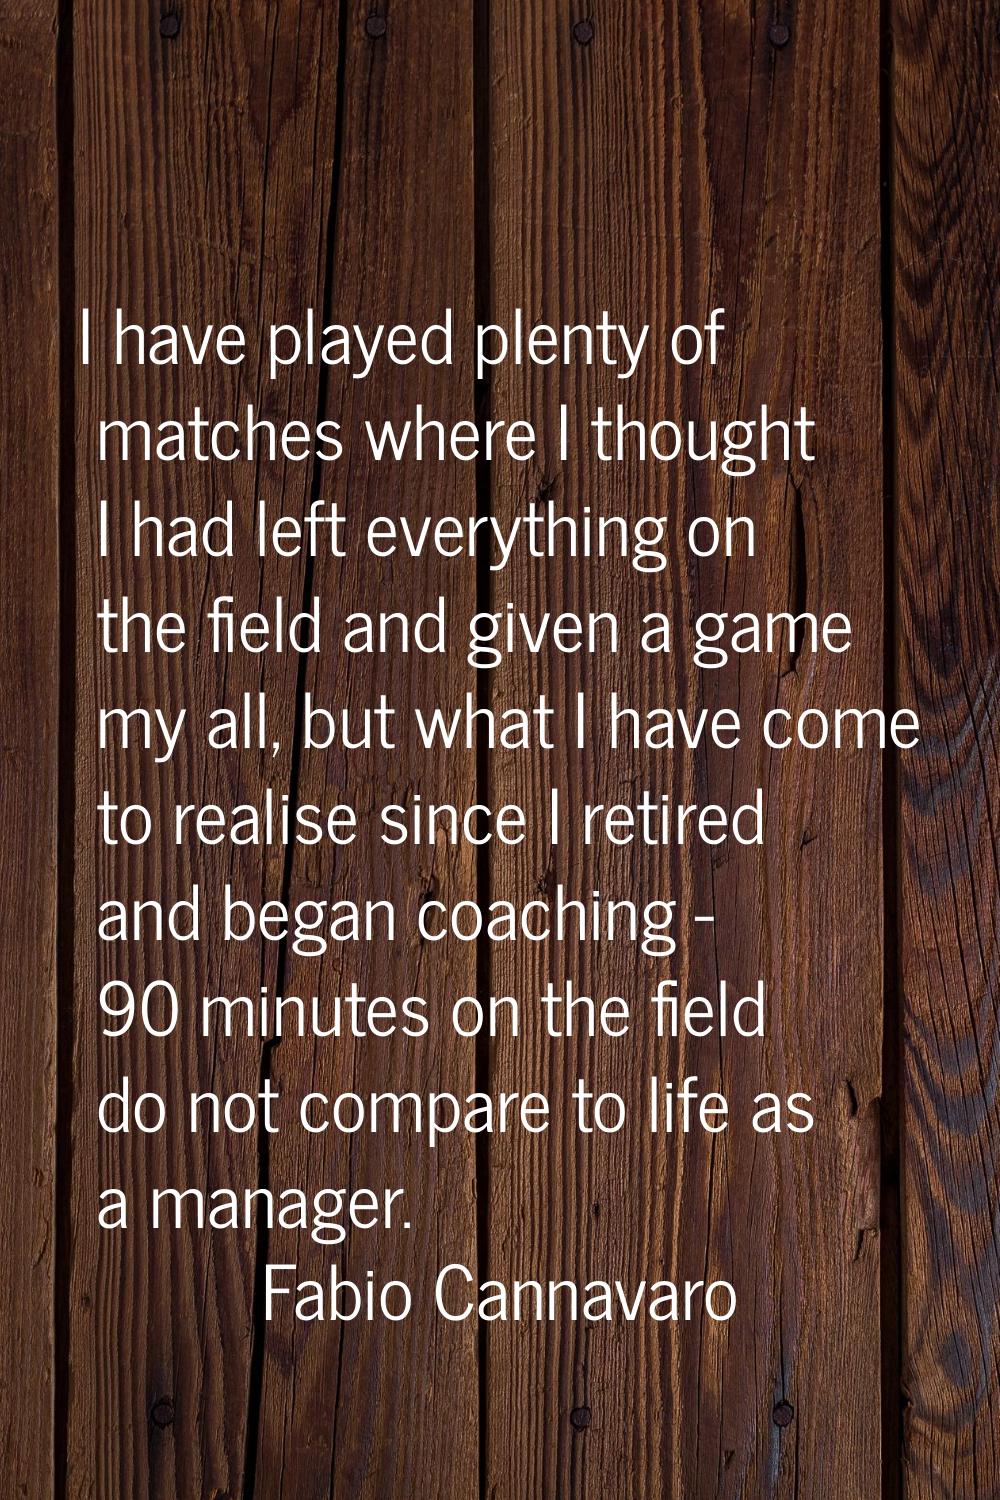 I have played plenty of matches where I thought I had left everything on the field and given a game